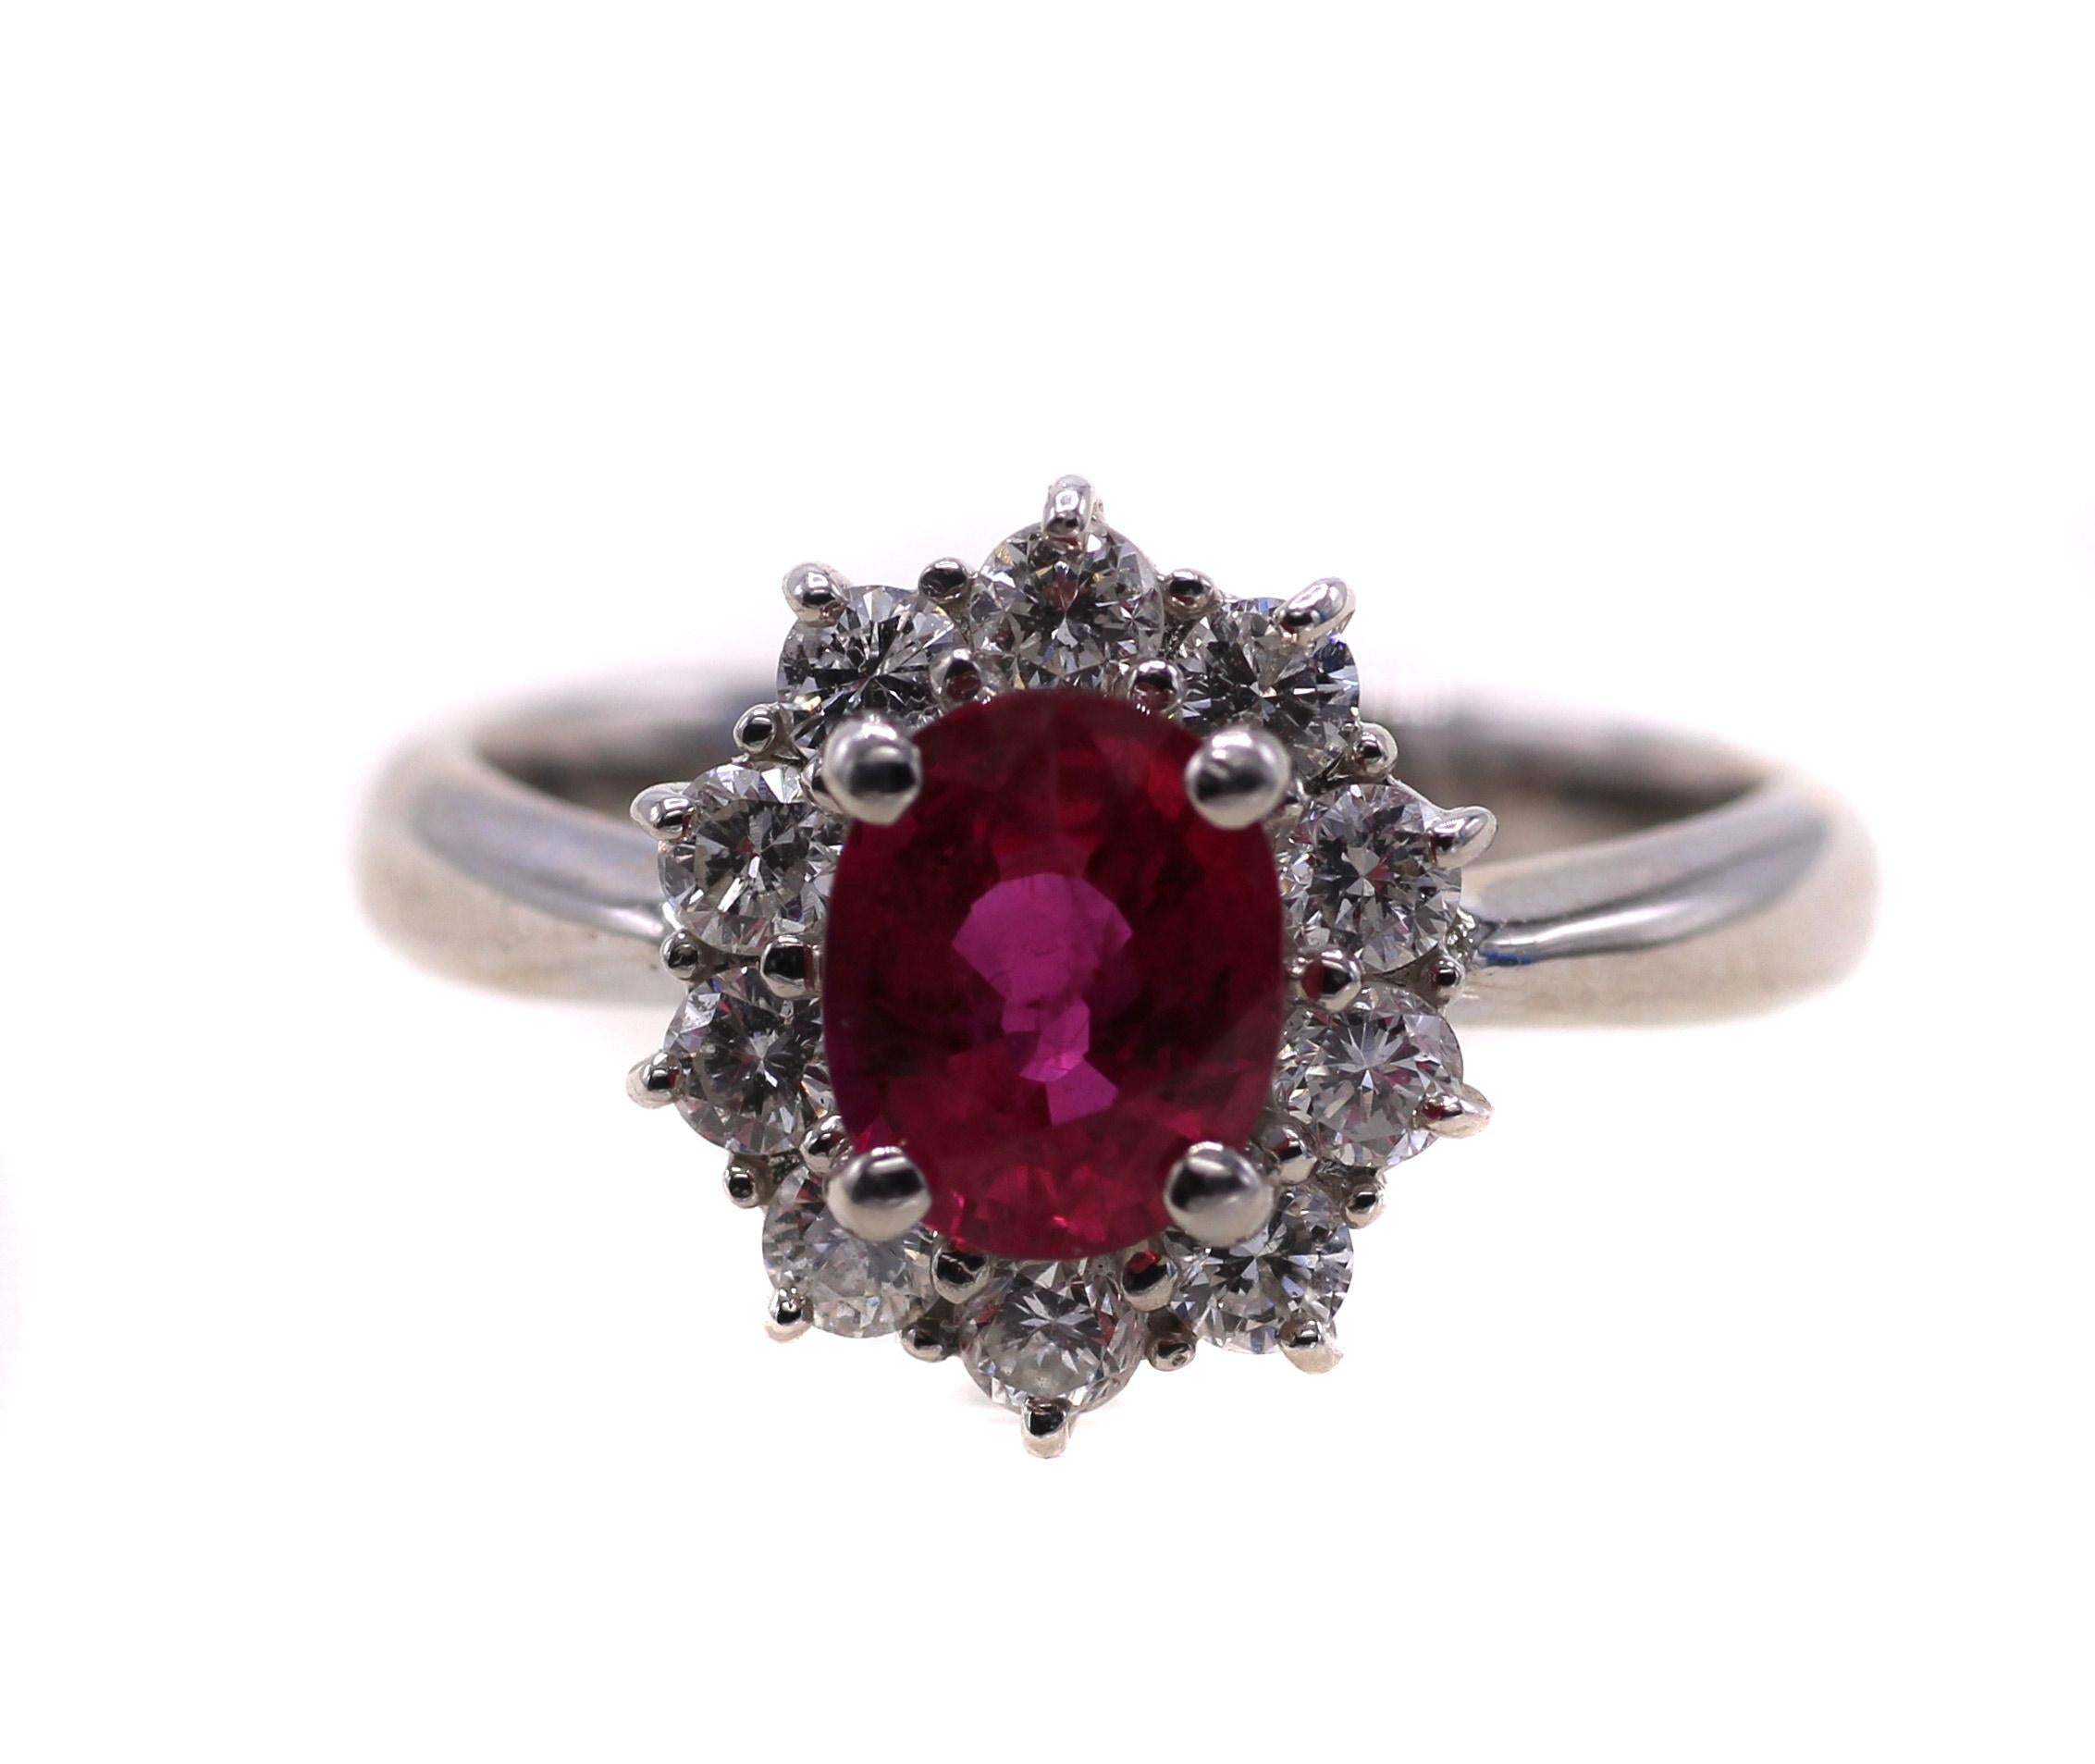 A lively oval vivid red Ruby, weighing 1.21 carats is the centerpiece of this masterfully handcrafted platinum engagement ring. The perfectly cut oval ruby exhibits an amazing saturation of color and brilliance. With very few natural inclusions it